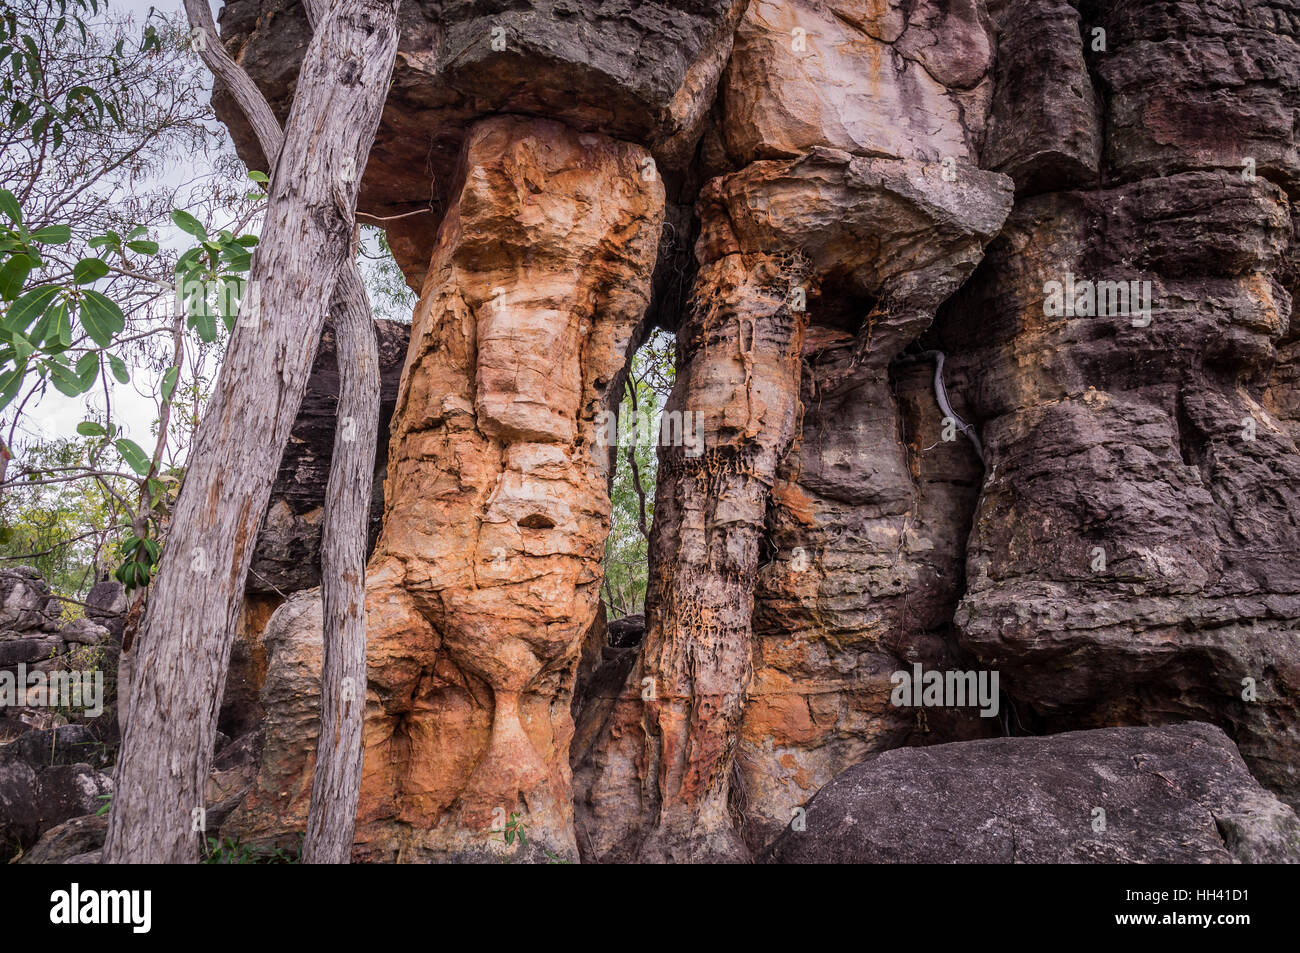 Lost City rock formations in Litchfield National Park Banque D'Images